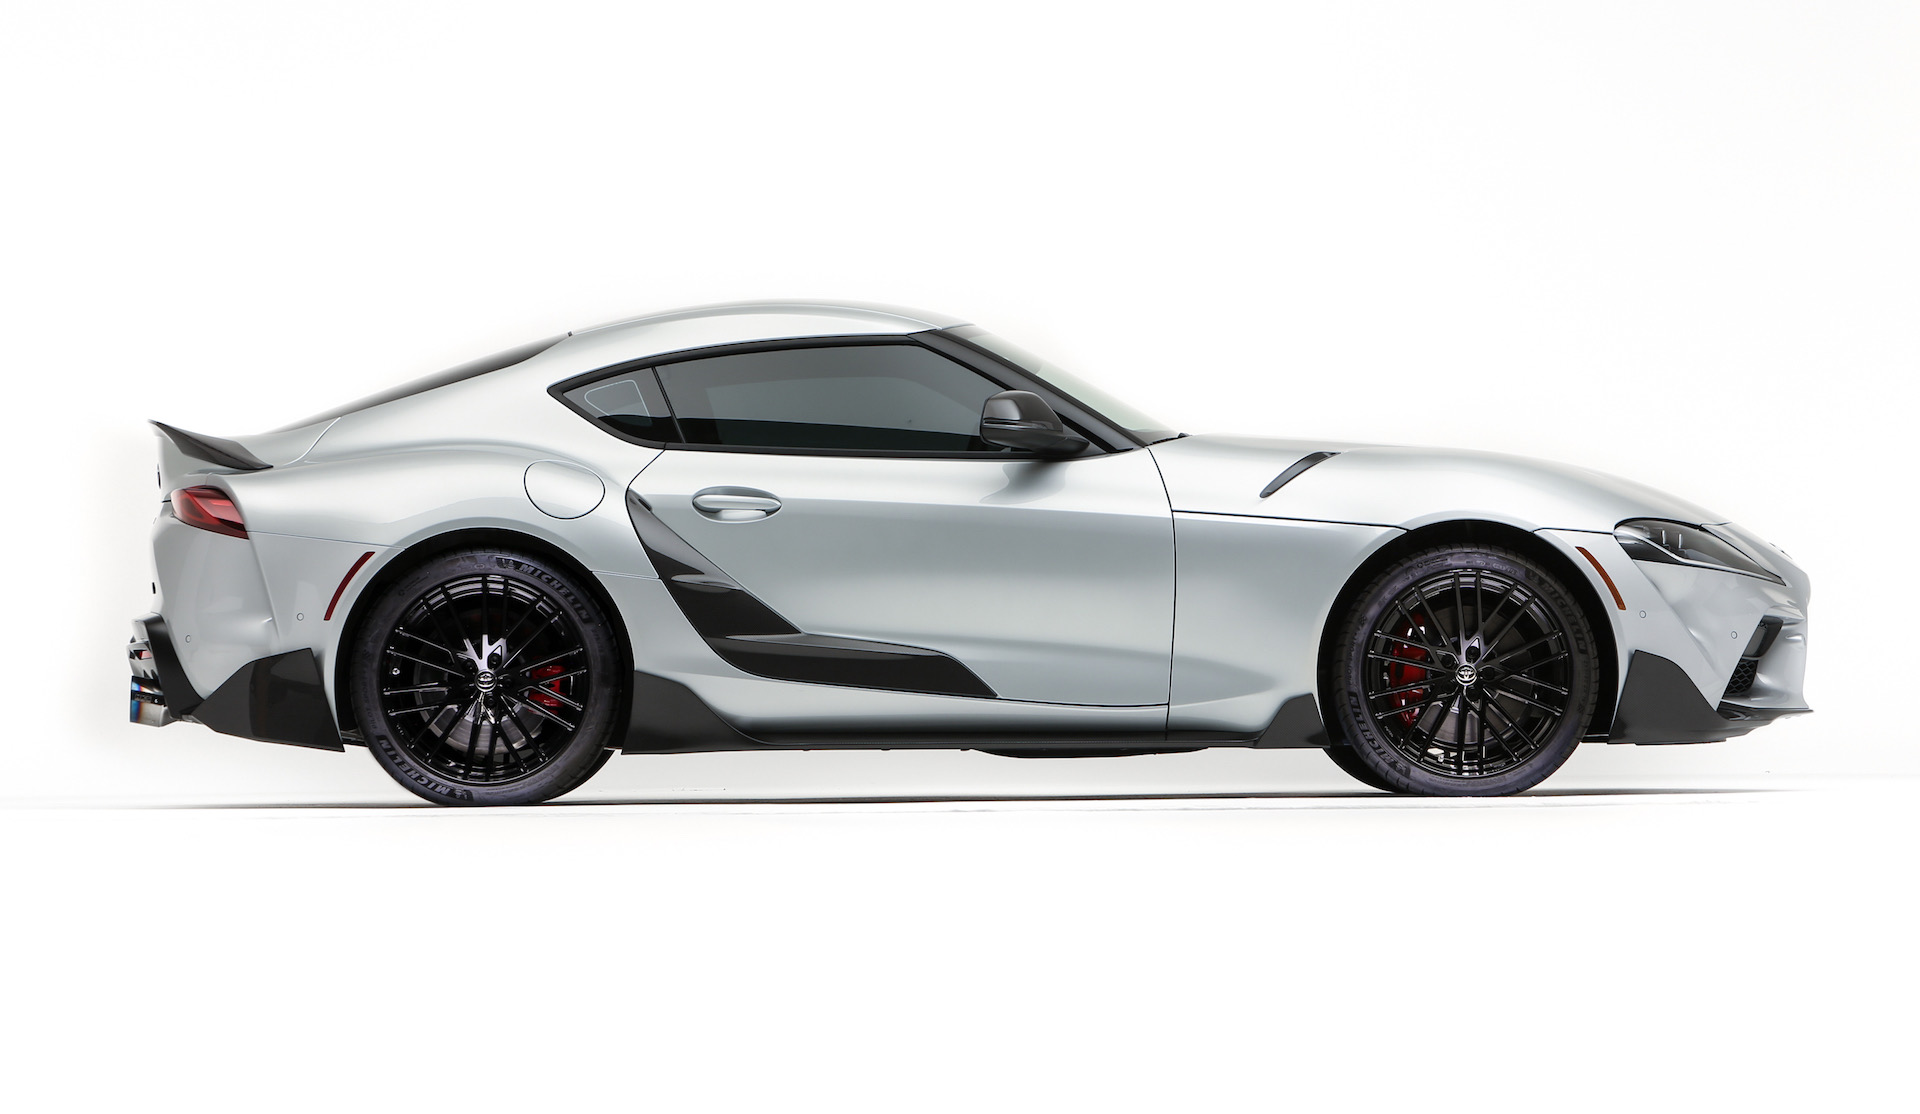 Toyota Supra ‘GRMN’ hardcore variant coming by 2021 – report